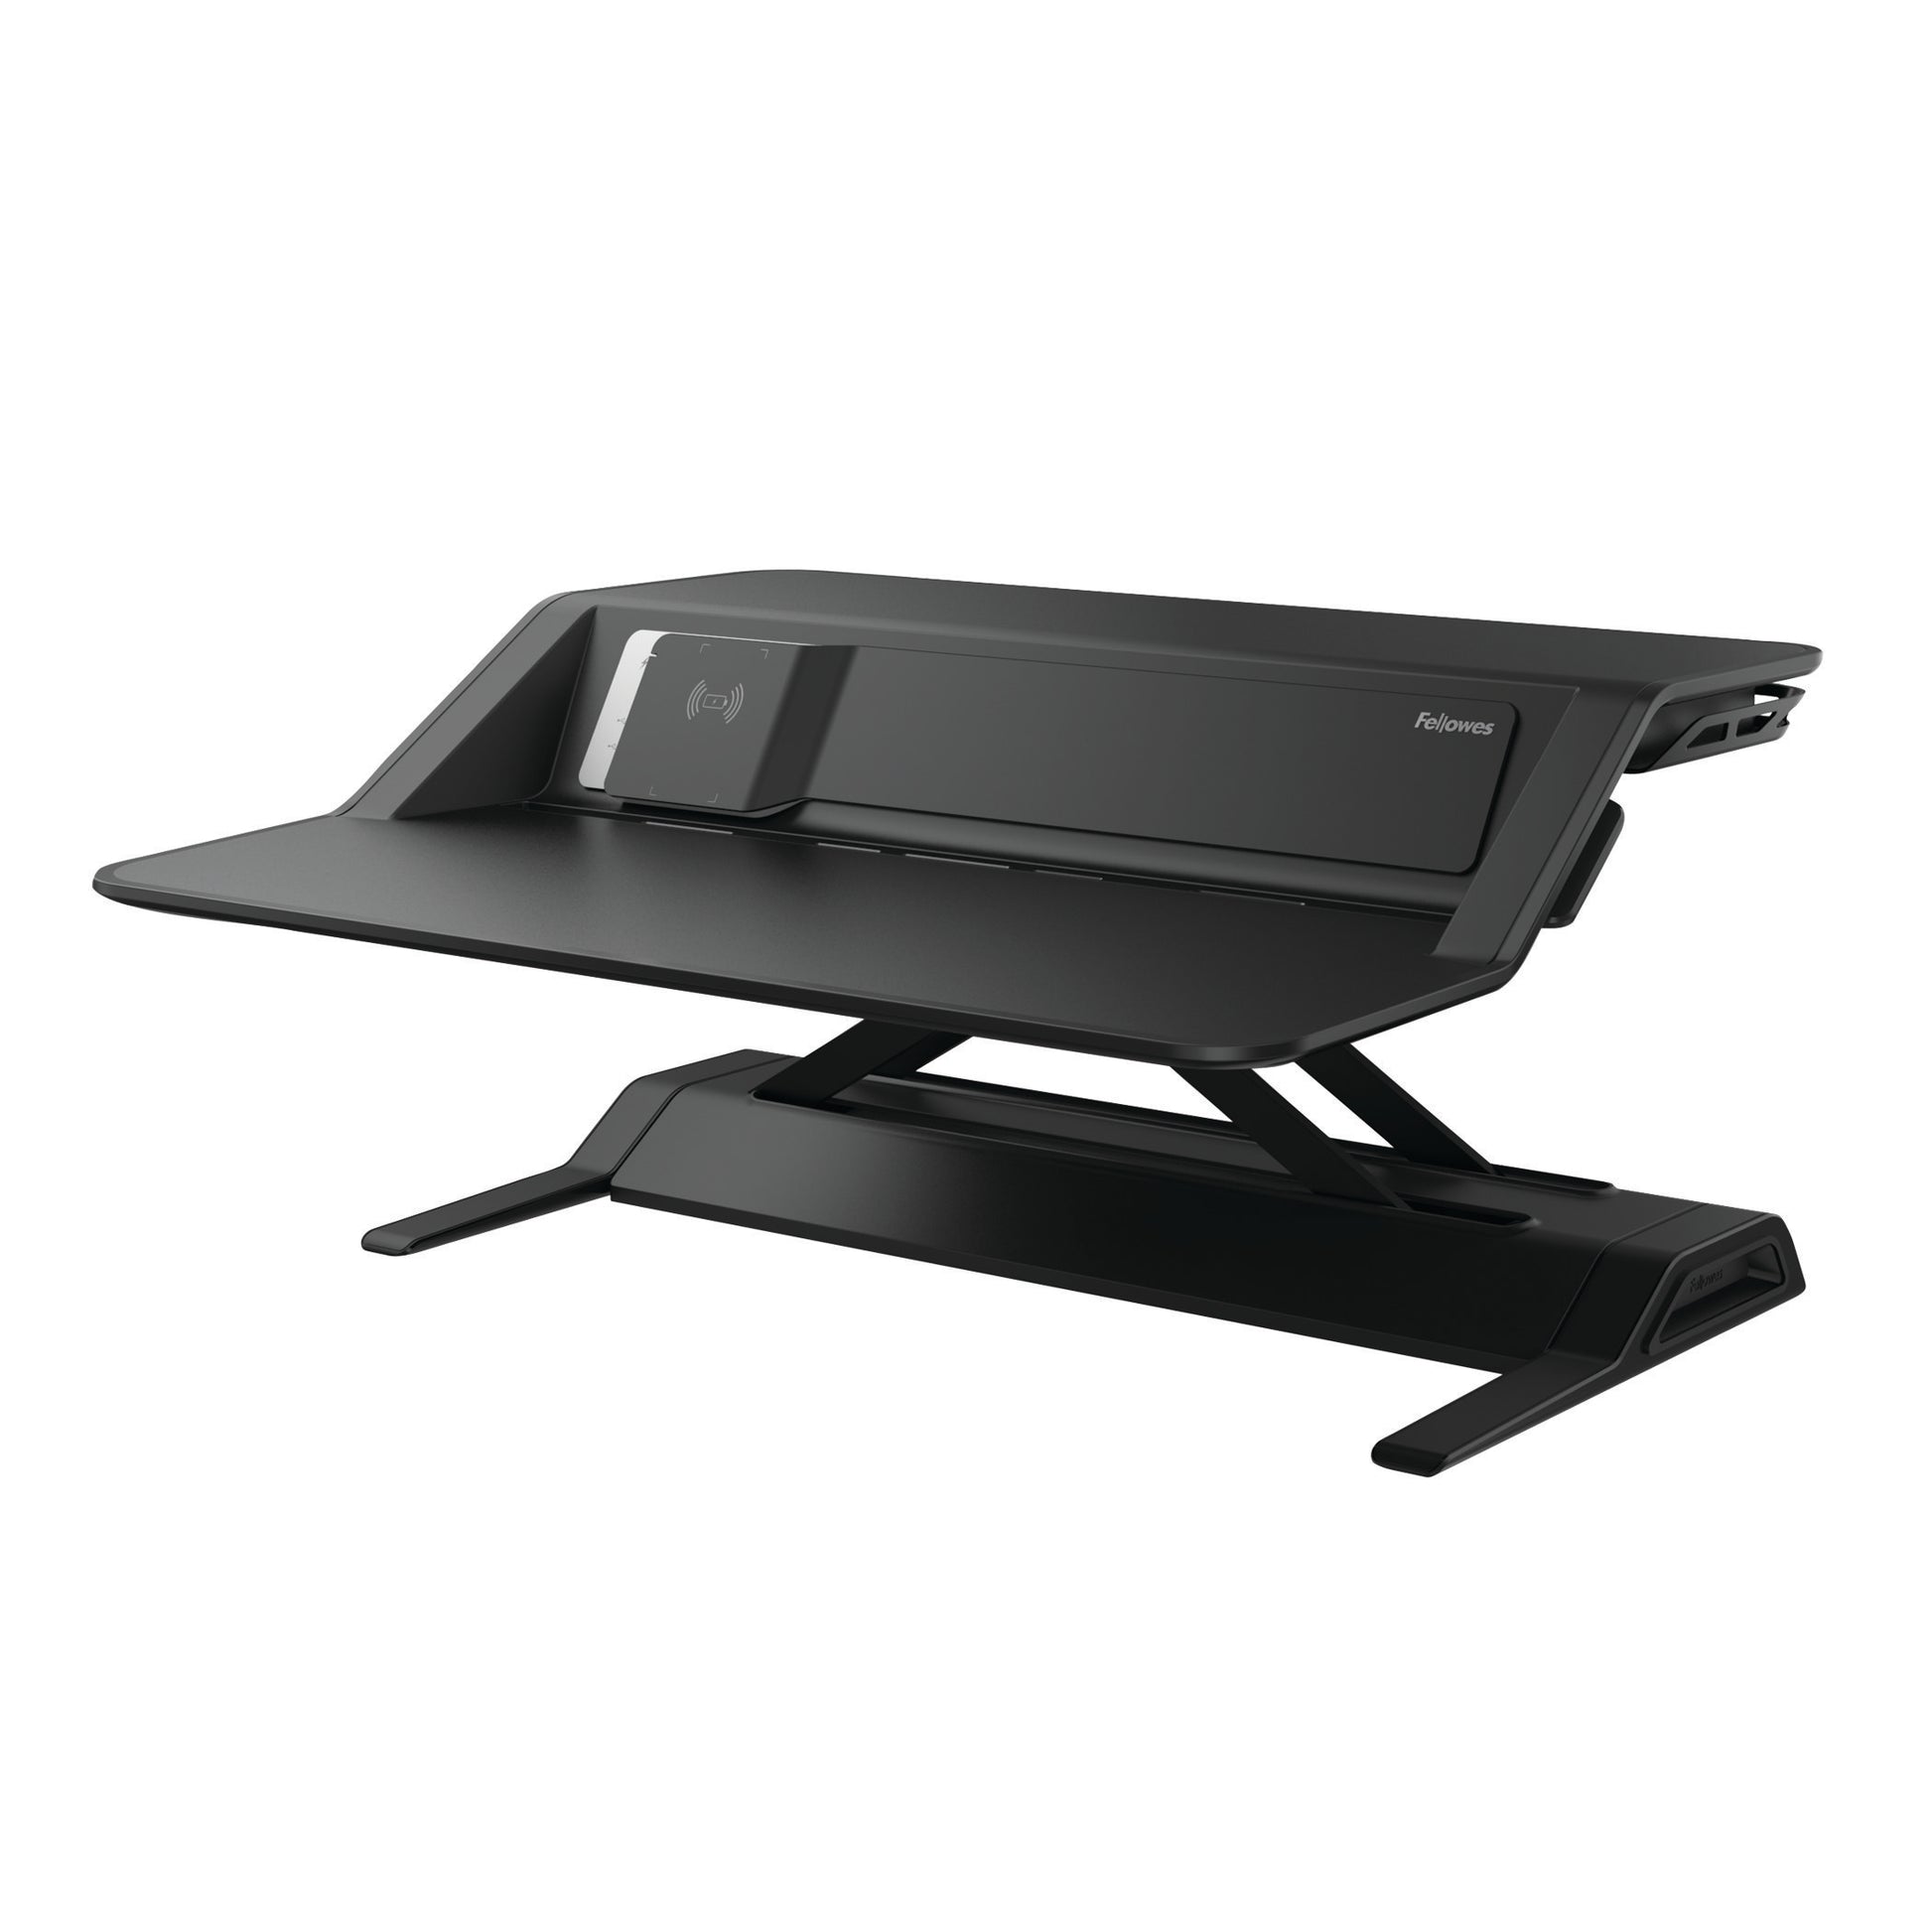 BUY FELLOWES LOTUS DX sit stand workstation FREE SHIPPING 8082101 black